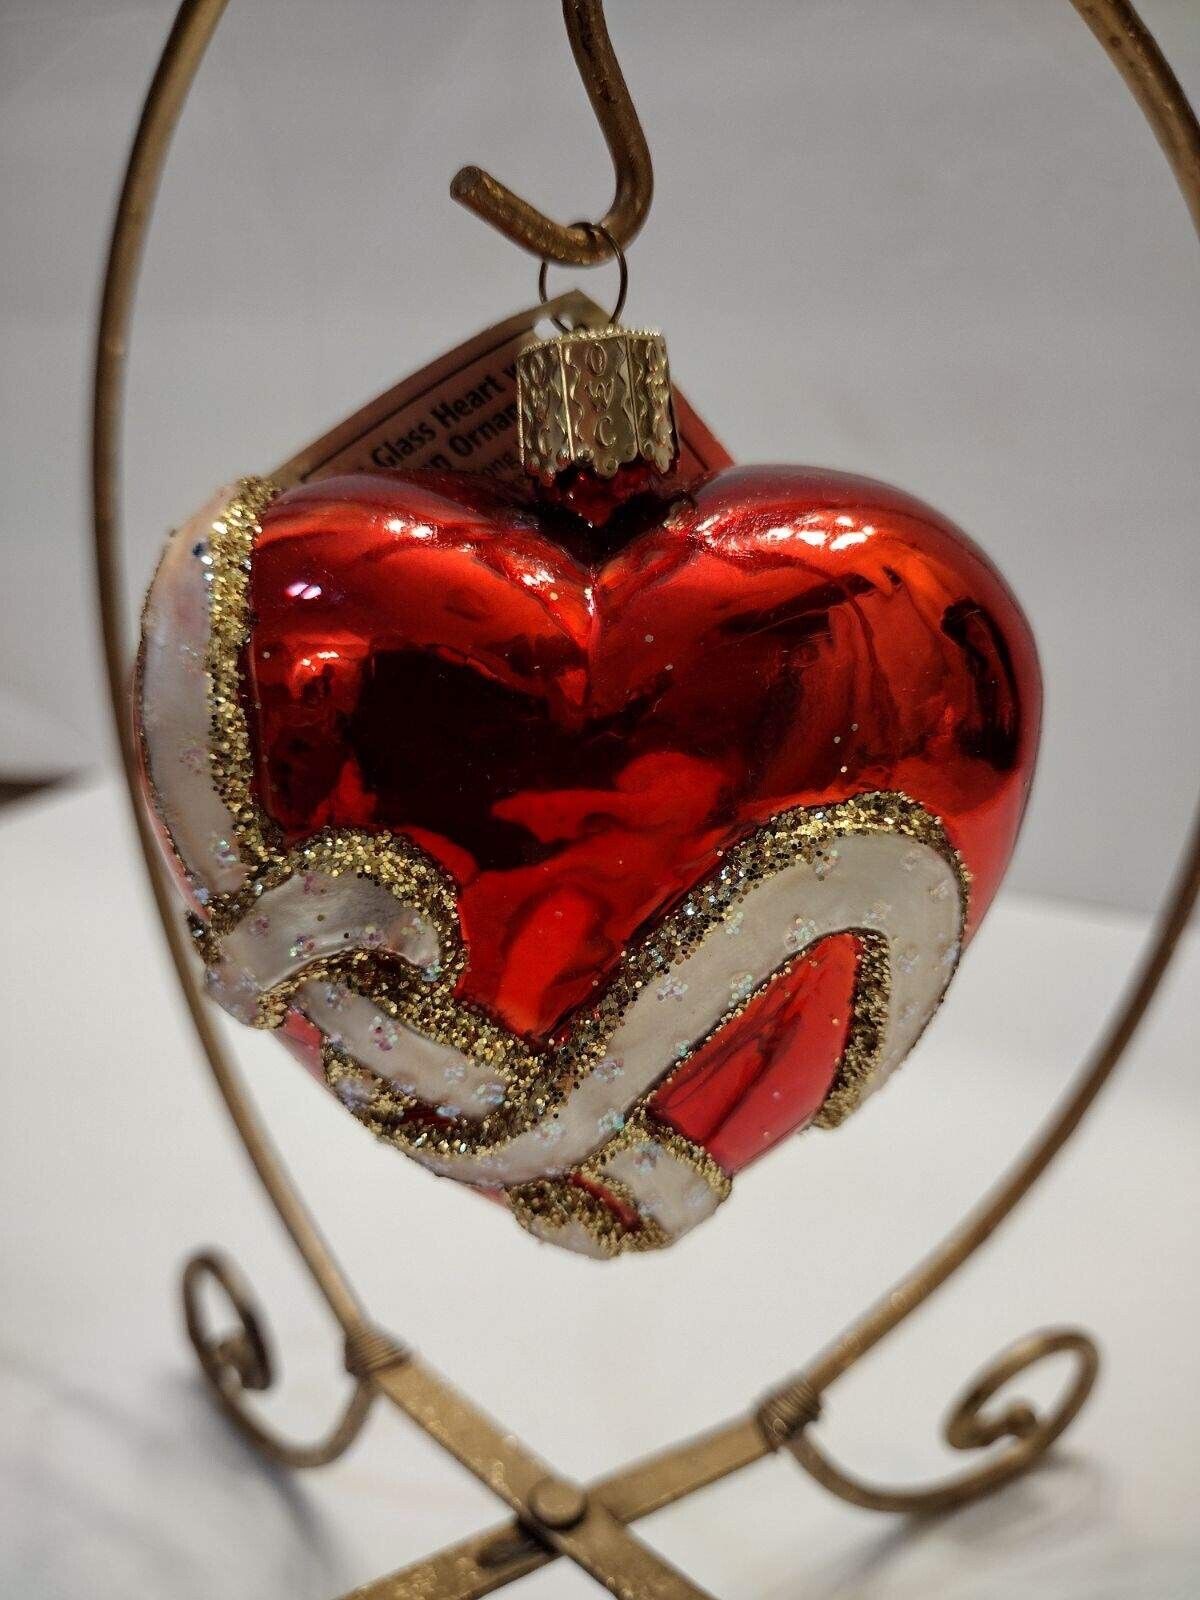 merck family's old world HEART ORNAMENT NIB RED TRIMMED IN GOLD AND WHITE 